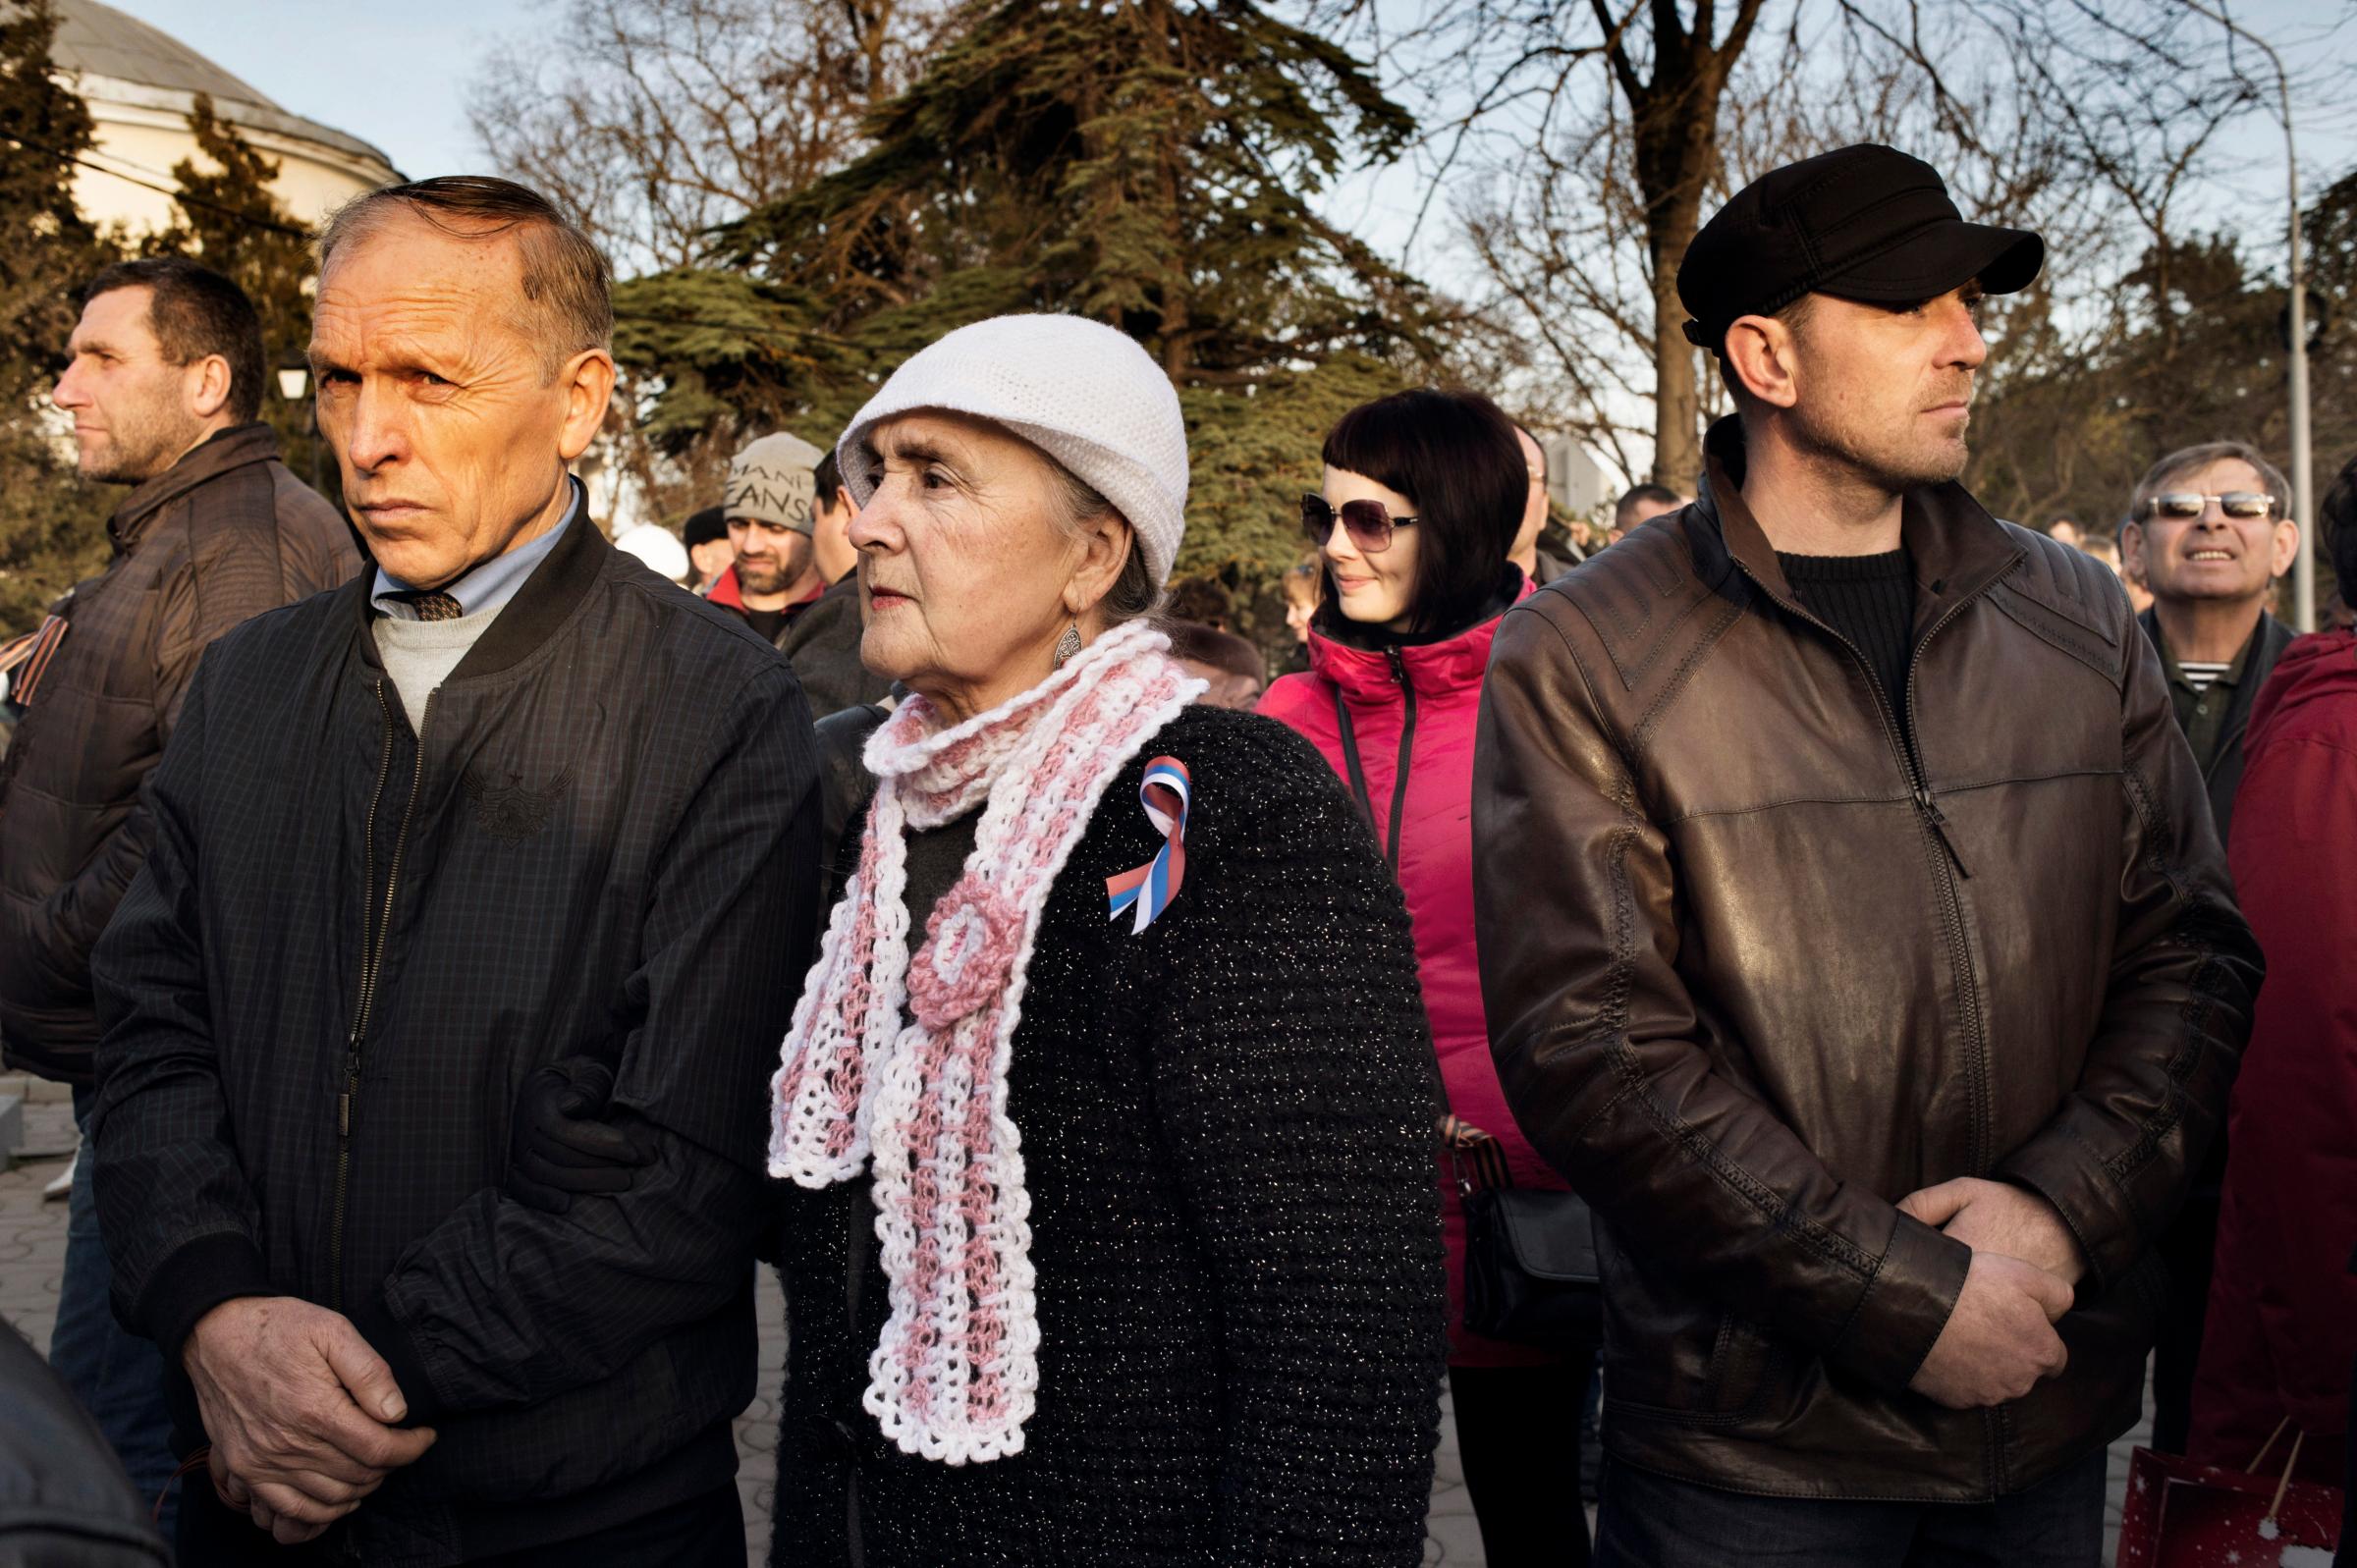 People at a pro-Russian gathering in Yevpatoria, Ukraine, March 5, 2014.